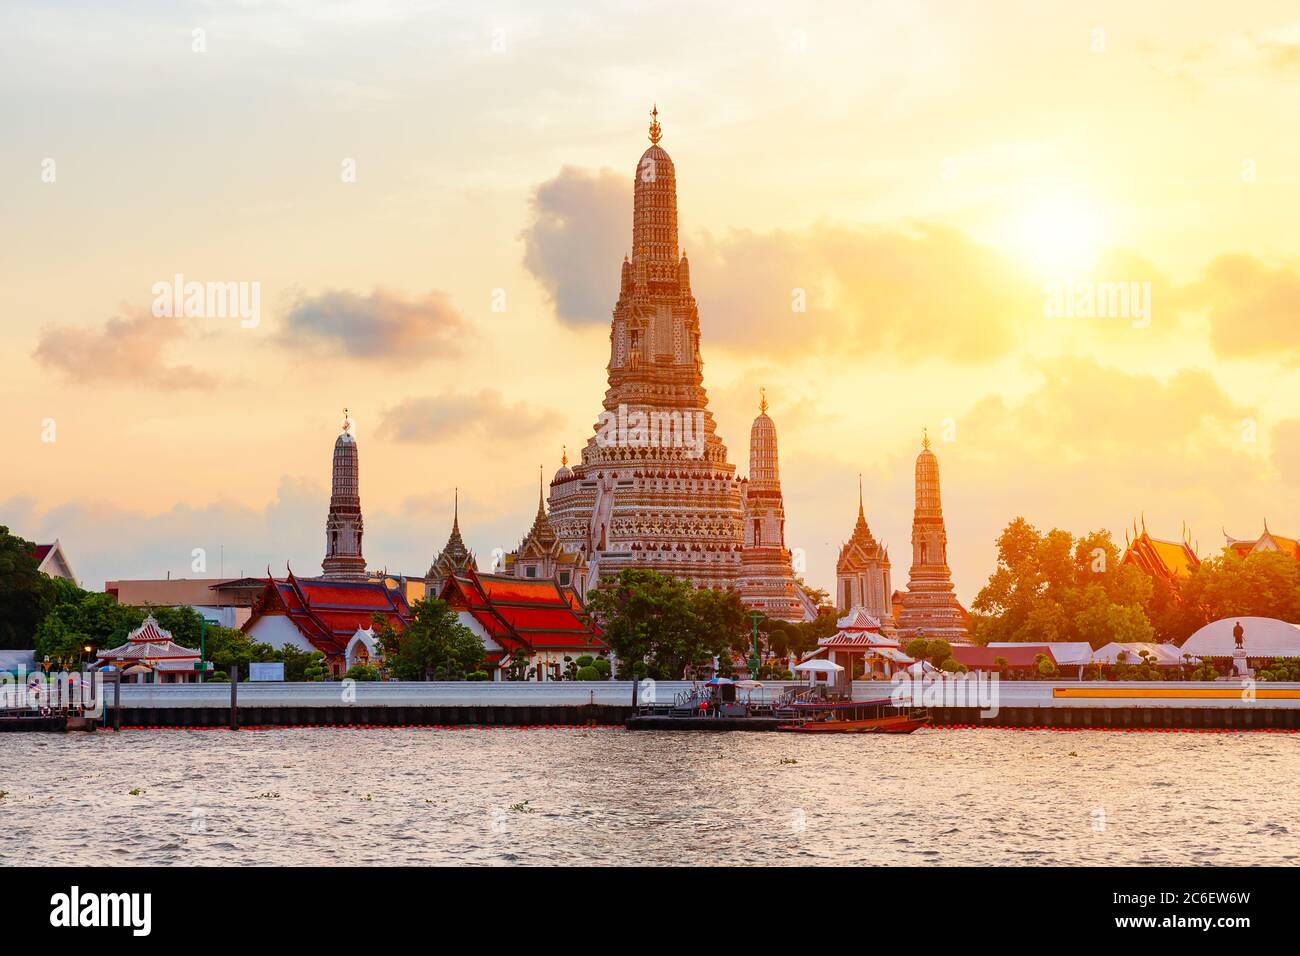 Wat Arun or 'Temple of Dawn' is a Buddhist temple in Bangkok Yai district of Bangkok, Thailand. Wat Arun is among the best known of Thailand's landmar Stock Photo